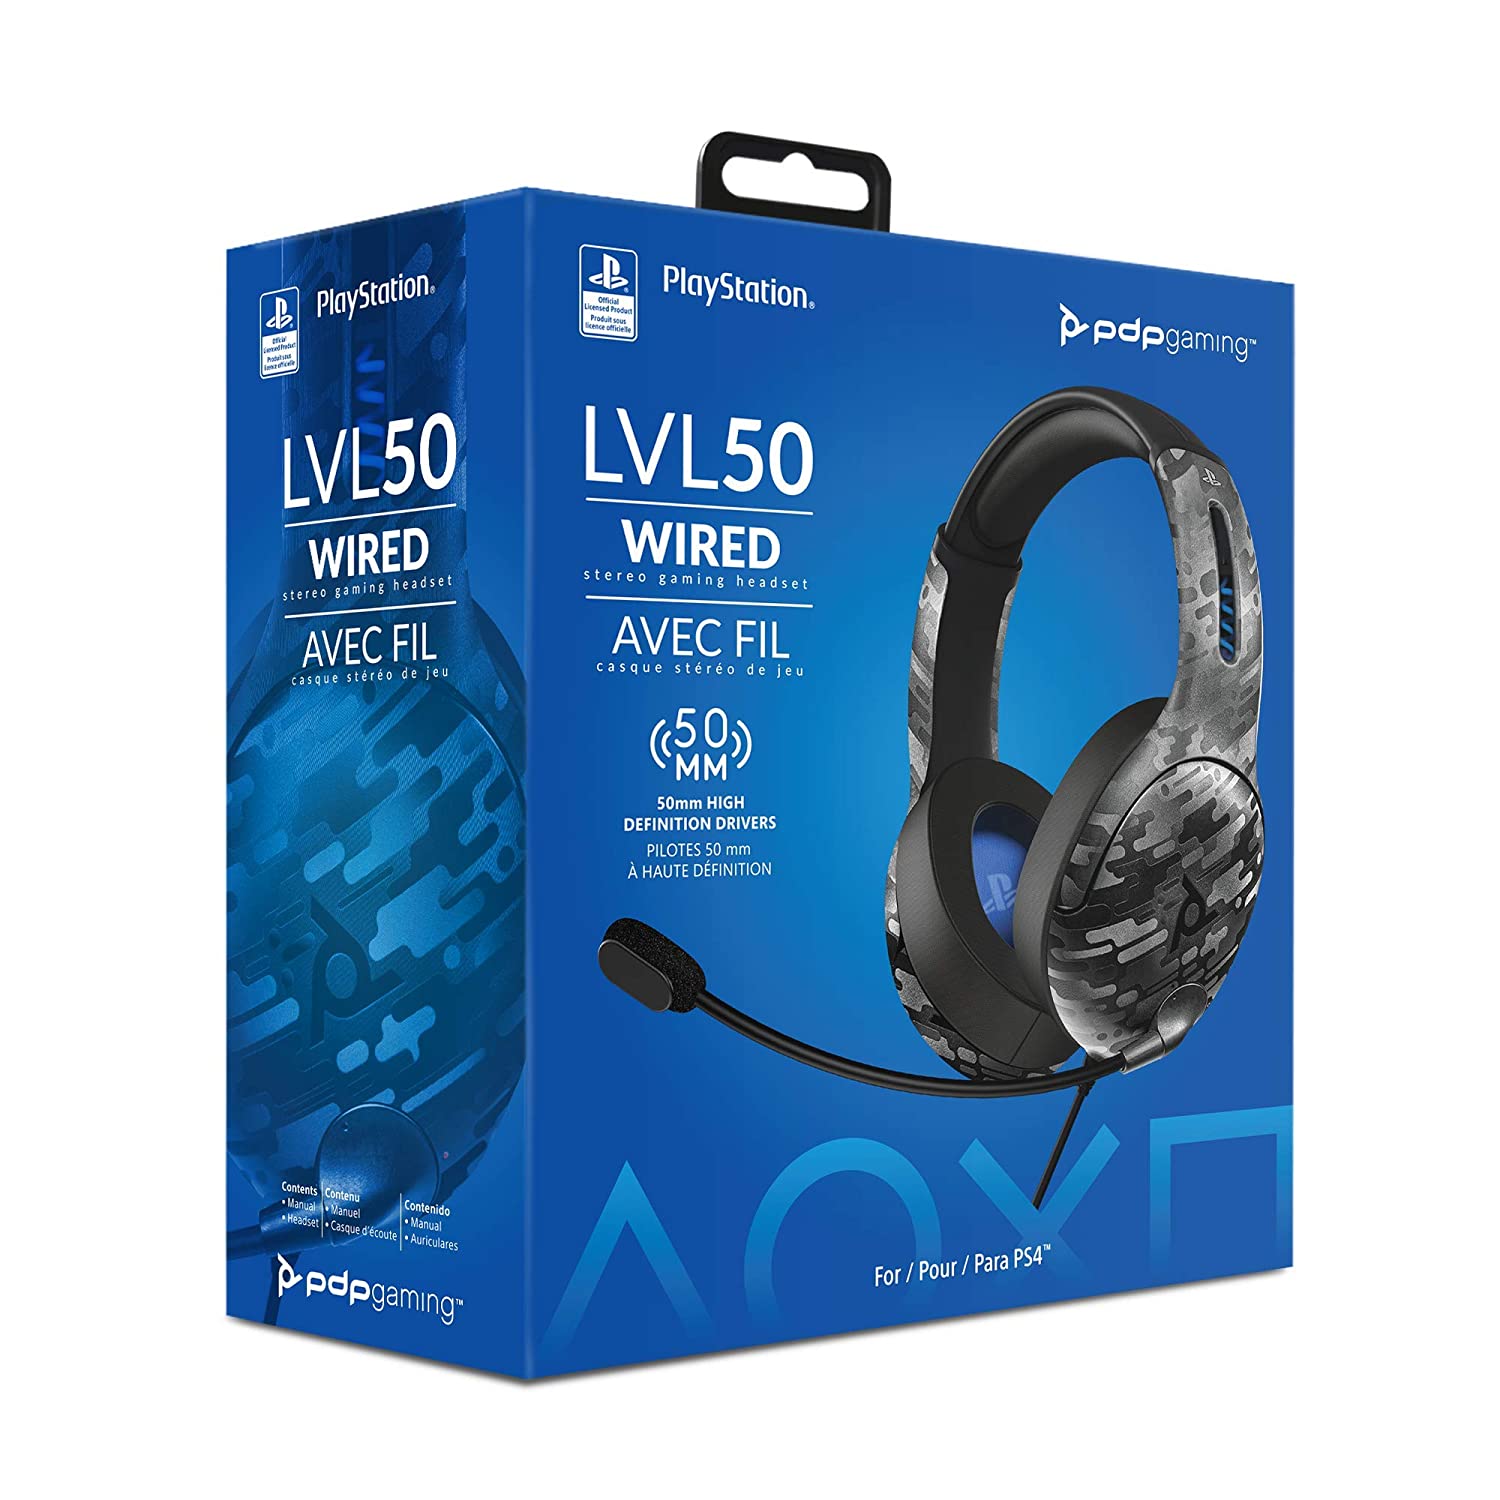 Volt Edge TX50 Wired Gaming Headset - PS4/PC/Mobile/VR NEW